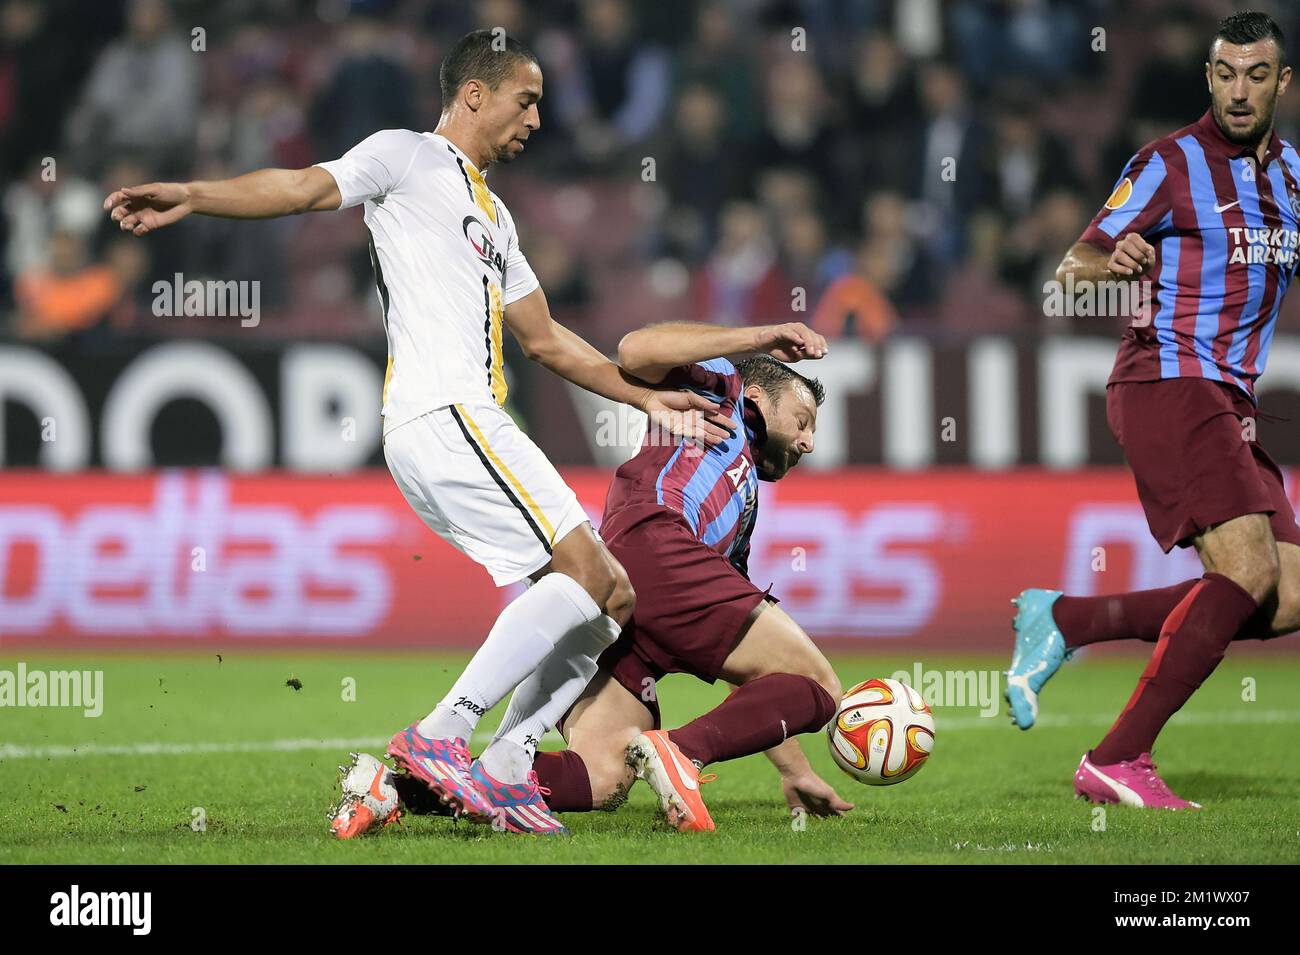 20141023 - TRABZON, TURKEY: Lokeren's Nill De Pauw and Trabzonspor's Avraam Papadopoulos fight for the ball during a game between Turkish club Trabzonspor AS and Belgian soccer team KSC Lokeren OVL in the Huseyin Avni Aker Stadium in Trabzon, Thursday 23 October 2014. It is the third day of the group stage of the UEFA Europa League competition, in group L. BELGA PHOTO YORICK JANSENS Stock Photo